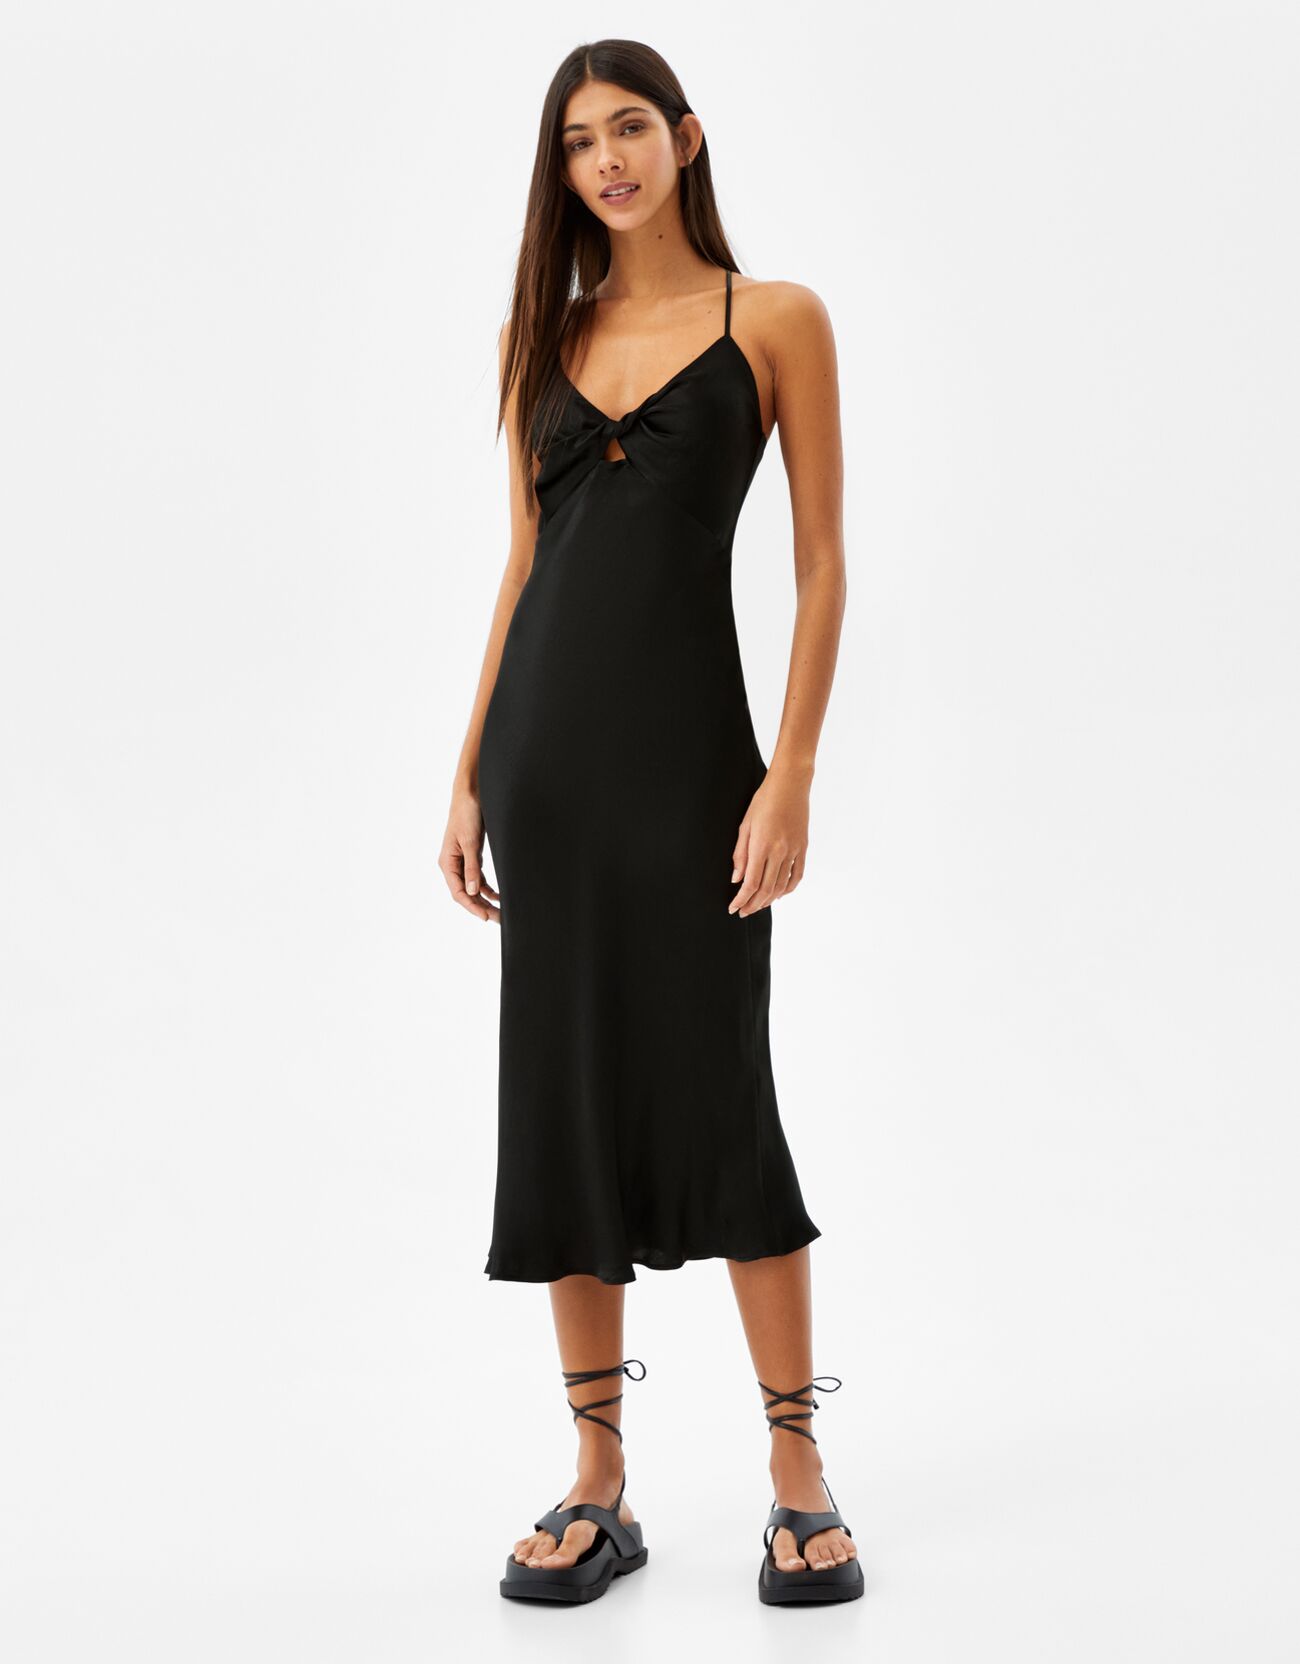 Bershka - Satin midi dress with front cut-out detail